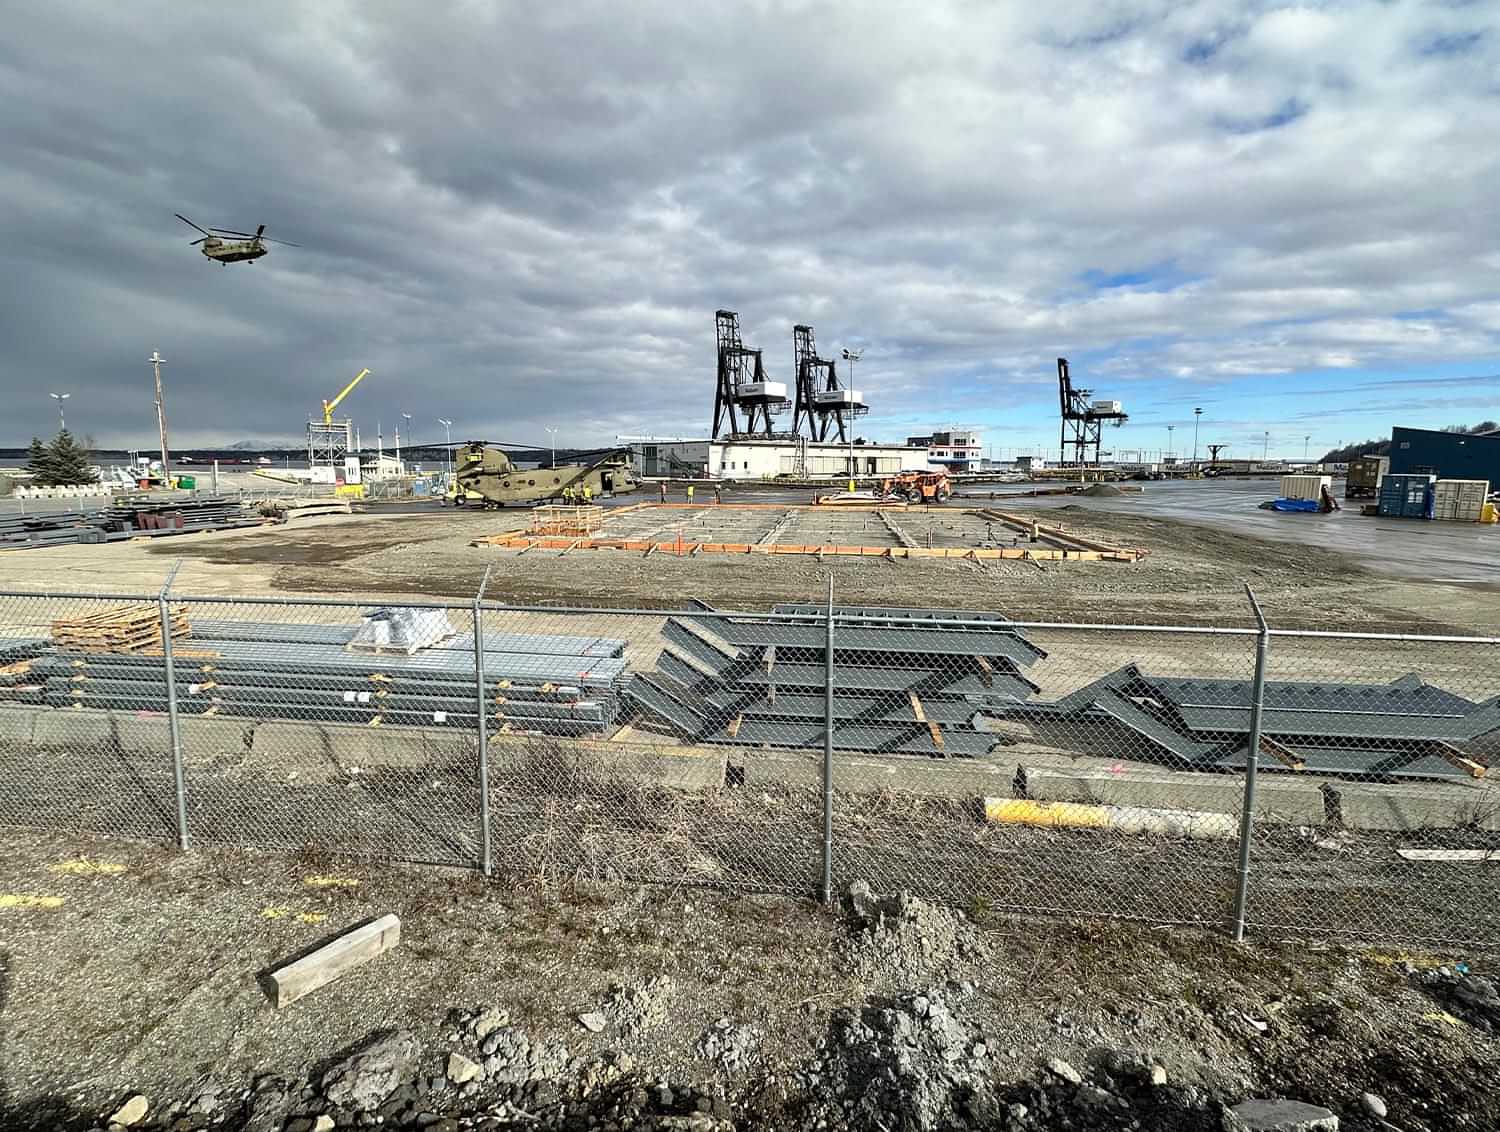 a Boeing CH-47 Chinook heavy-lift helicopter flies in the distance, over foundations and construction yard of the Port of Alaska administration building